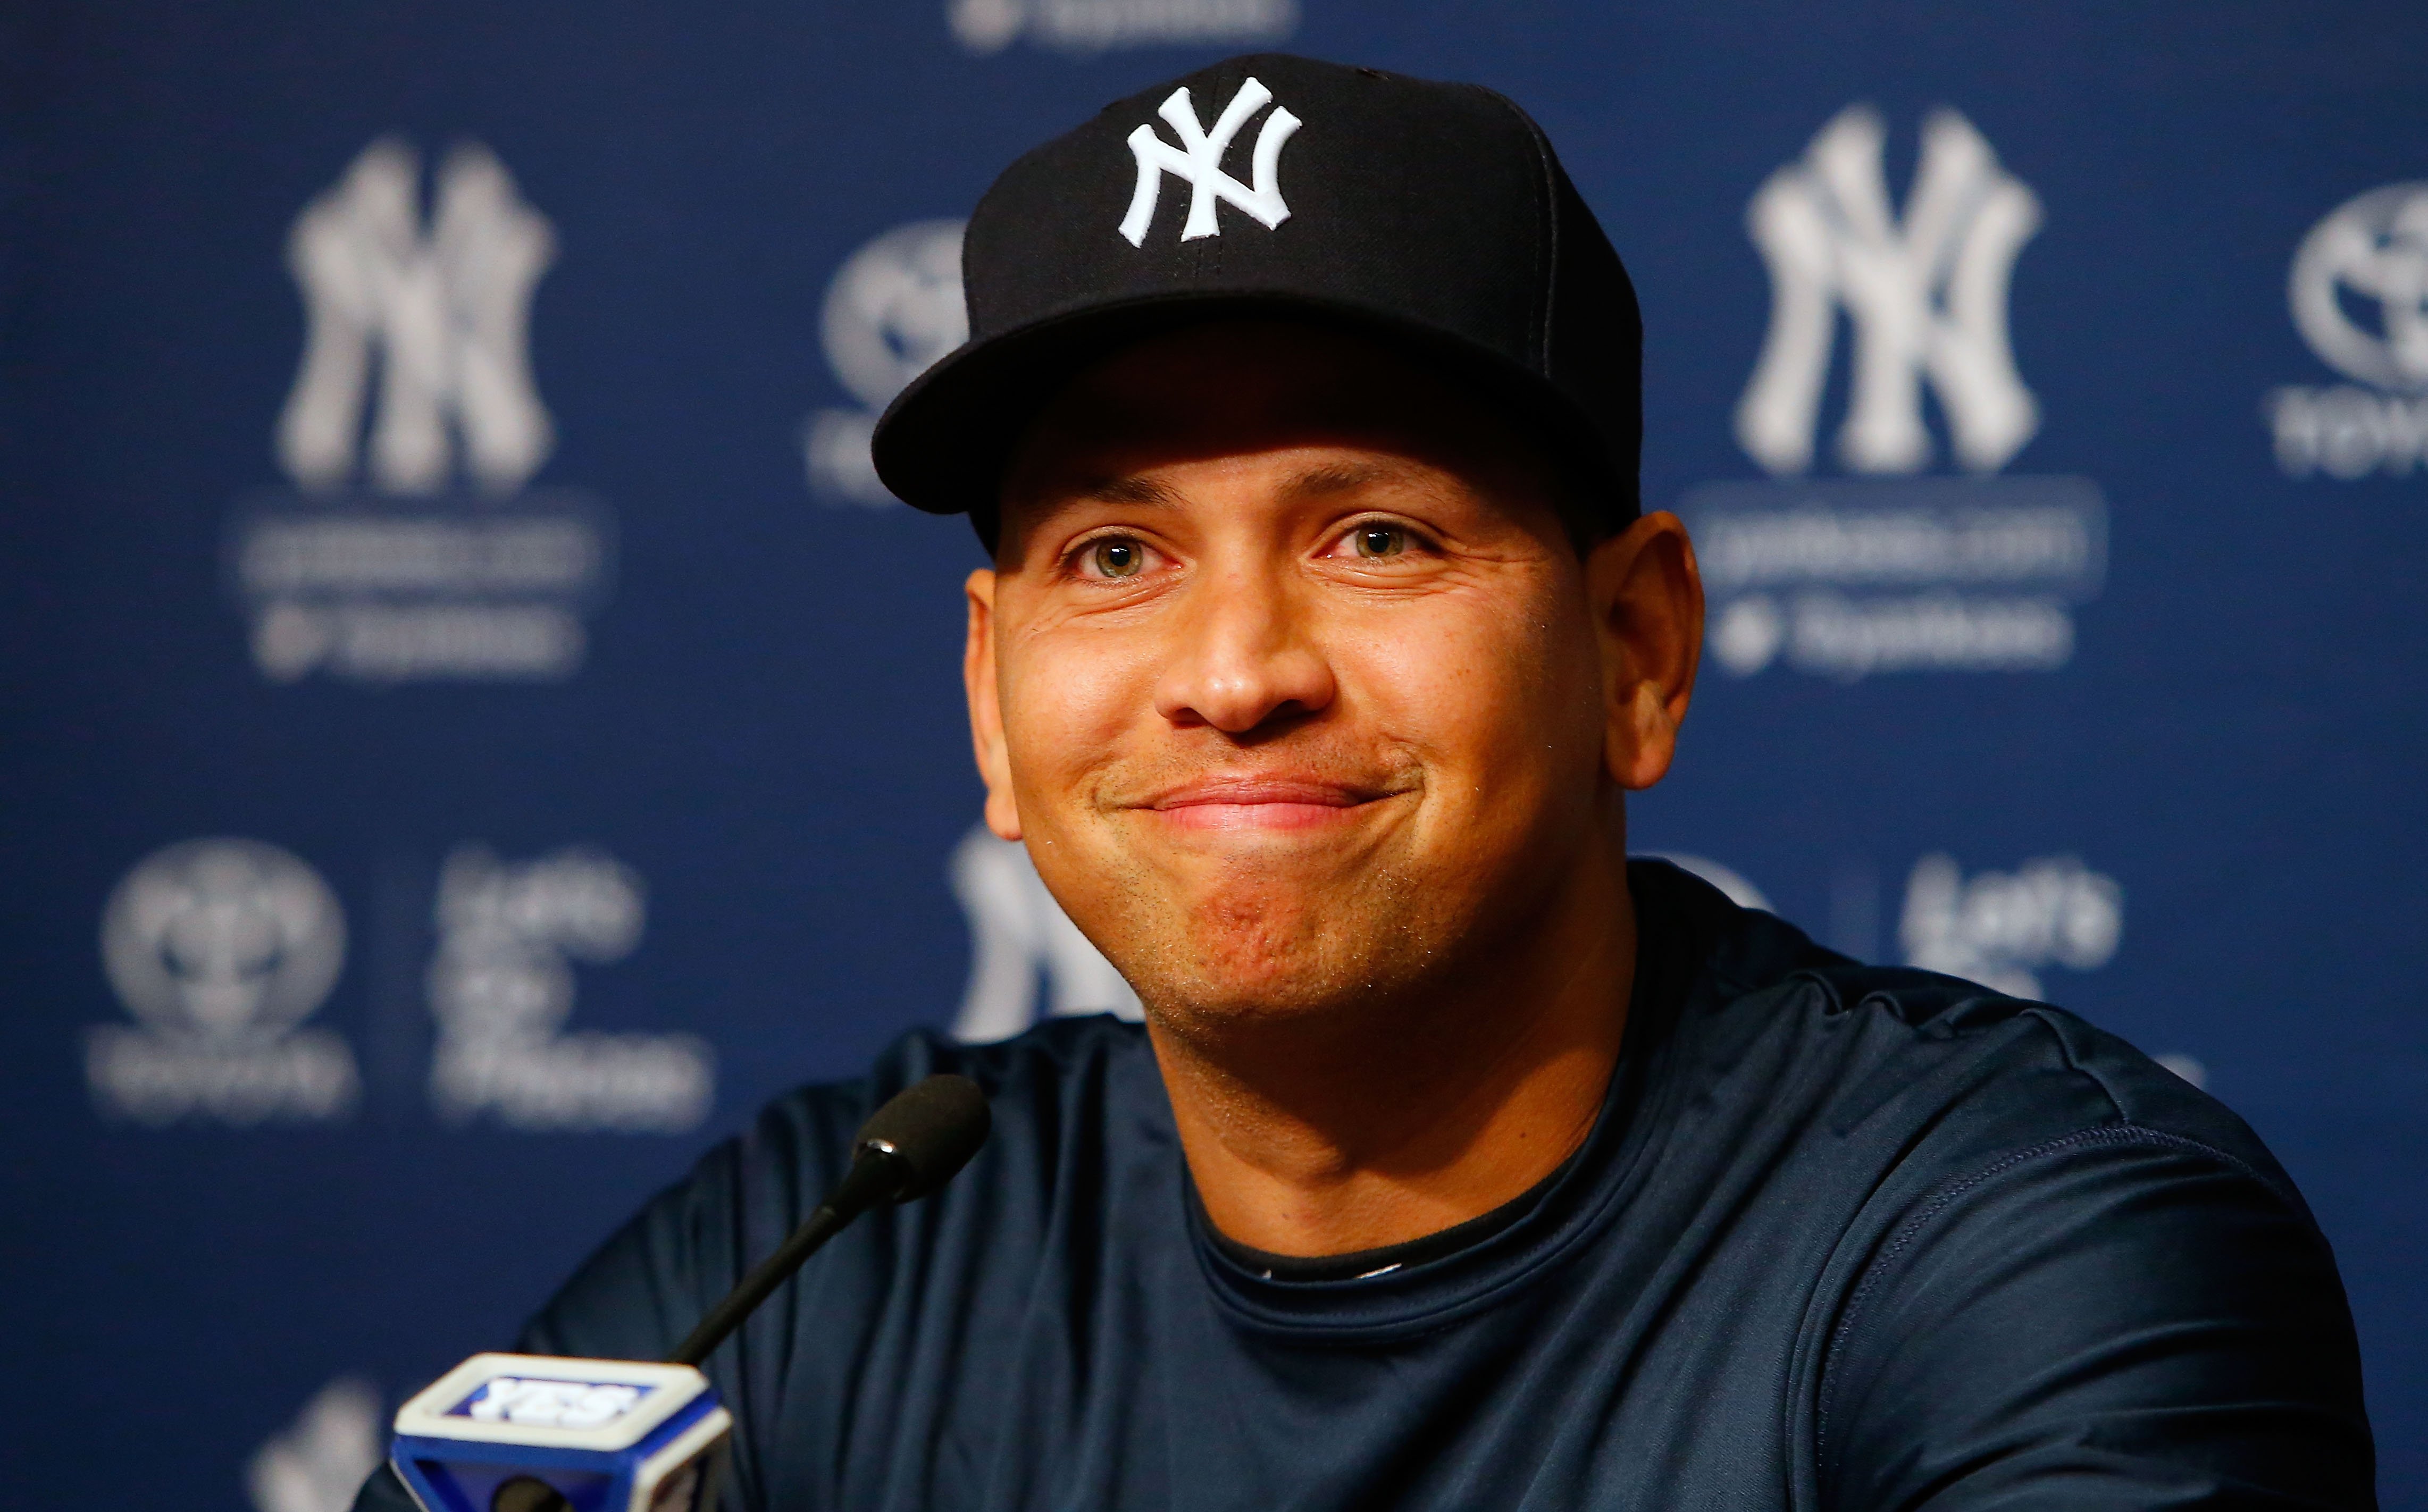 Alex Rodriguez on August 7, 2016 at Yankee Stadium, New York City | Source: Getty Images